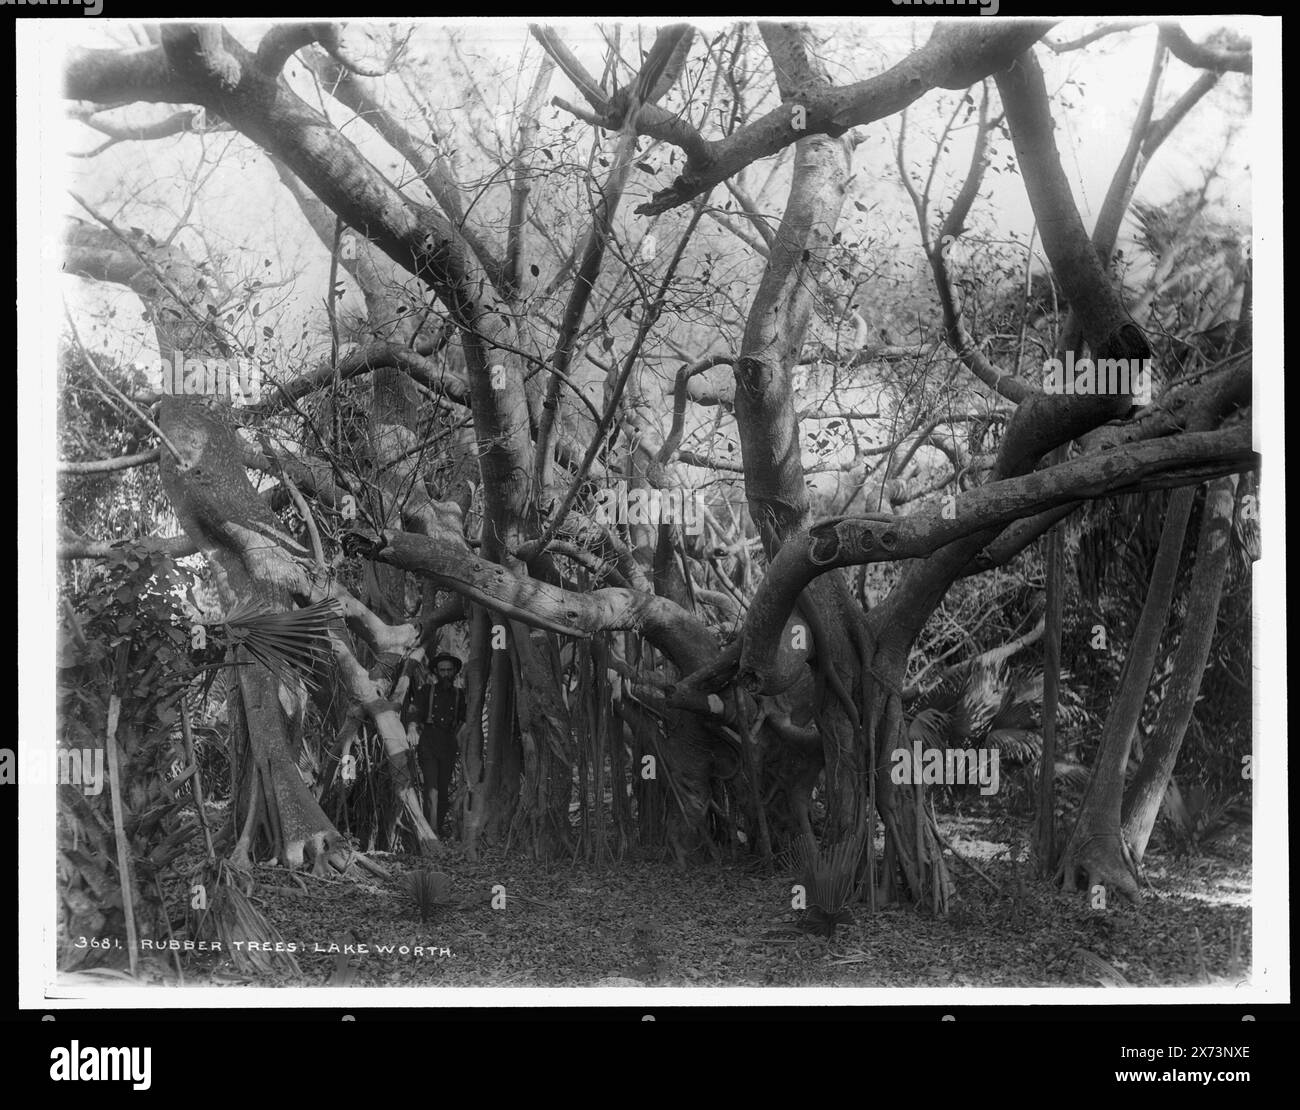 Rubber trees, Lake Worth, Attribution to Jackson based on Catalogue of the W.H. Jackson Views (1898)., Corresponding glass transparency (same series code) available on videodisc frame 1A-28790., Detroit Publishing Co. no. 3681., Gift; State Historical Society of Colorado; 1949,  Rubber trees. , United States, Florida, Lake Worth. Stock Photo